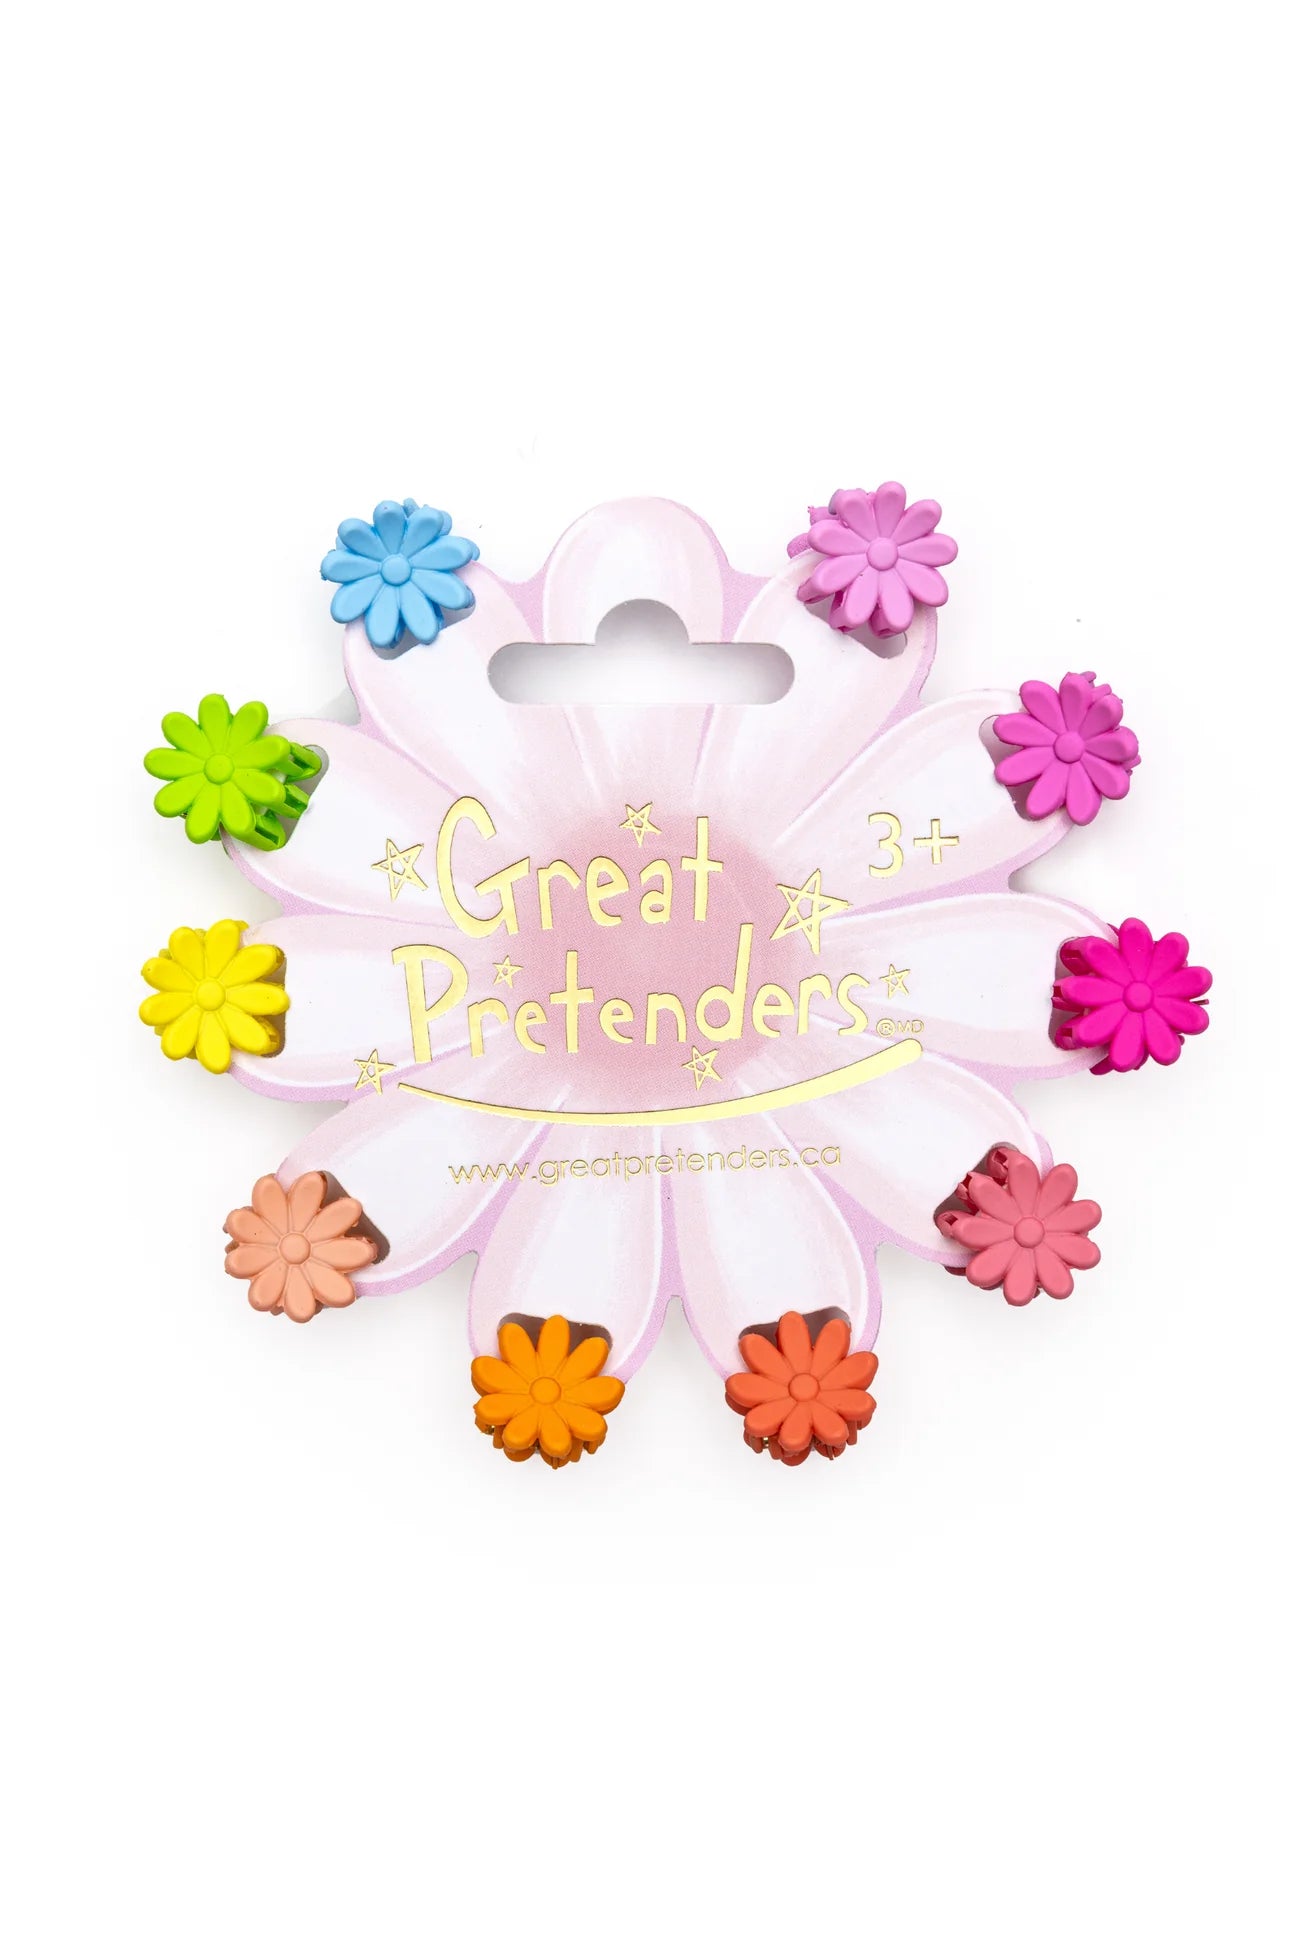 Daisy Delight Mini Hairclips by Great Pretenders # 88082